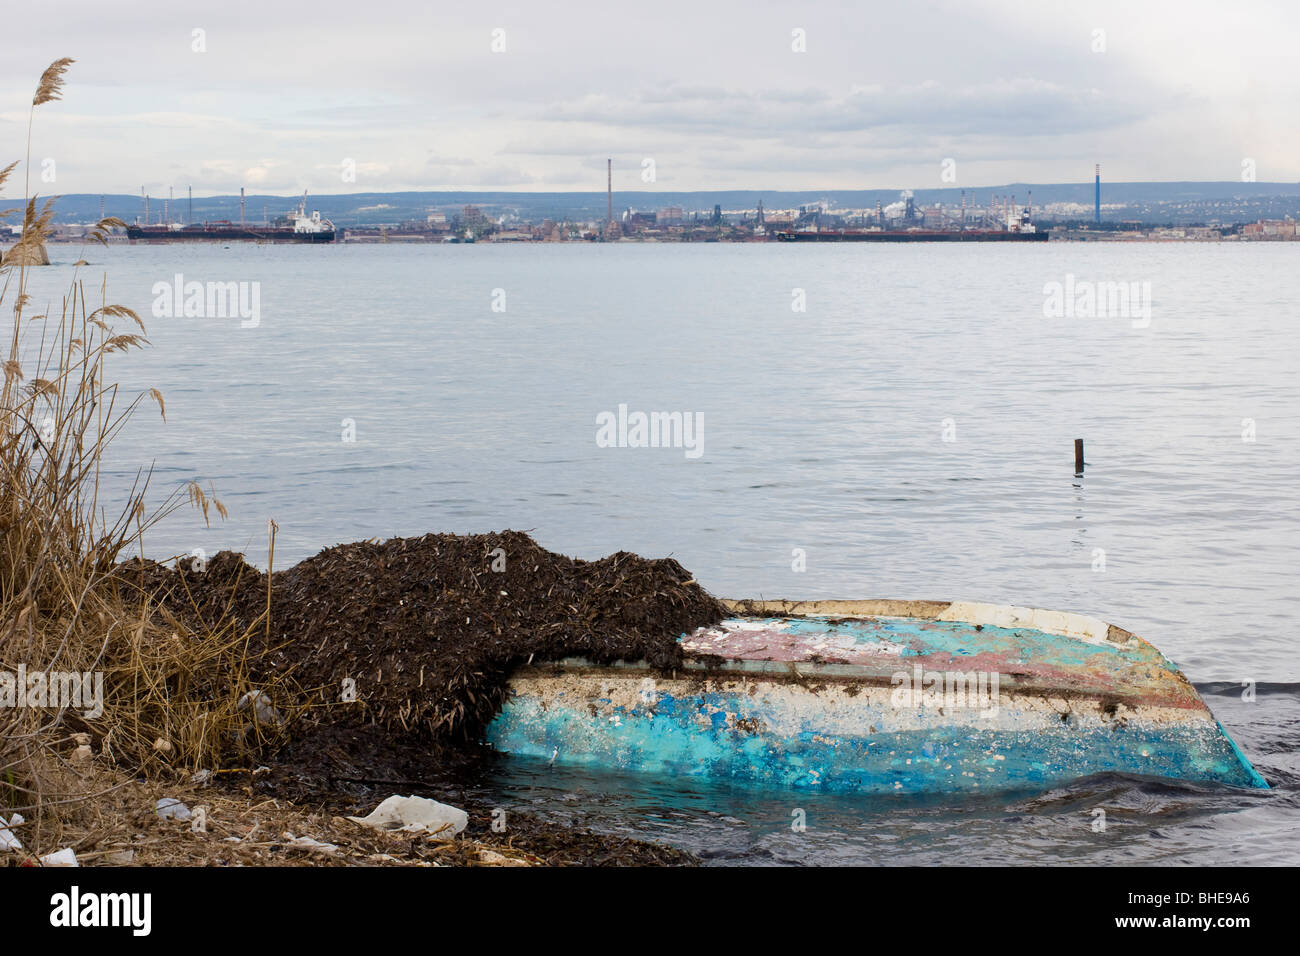 Pollution and degradation of a beautiful waterscape in industrial area Stock Photo